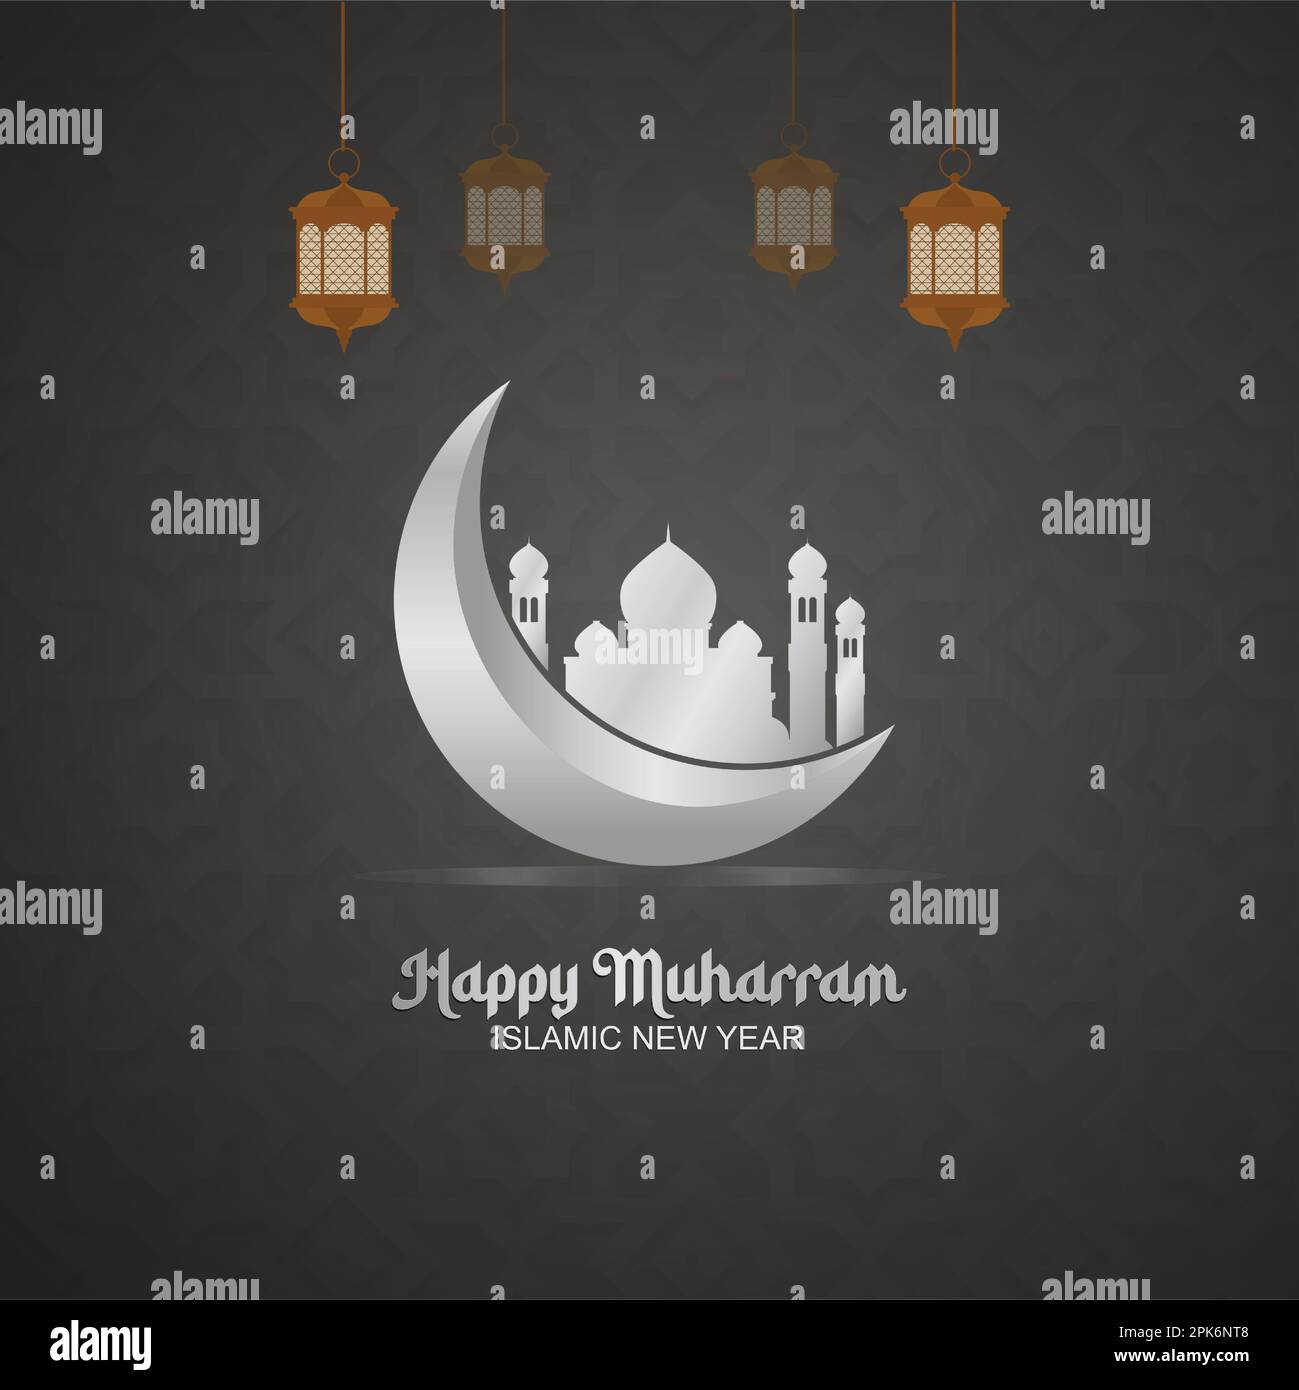 Islamic new year, happy muharram, vector with hanging lantern, half moon and mosque, modern background illustration Stock Vector